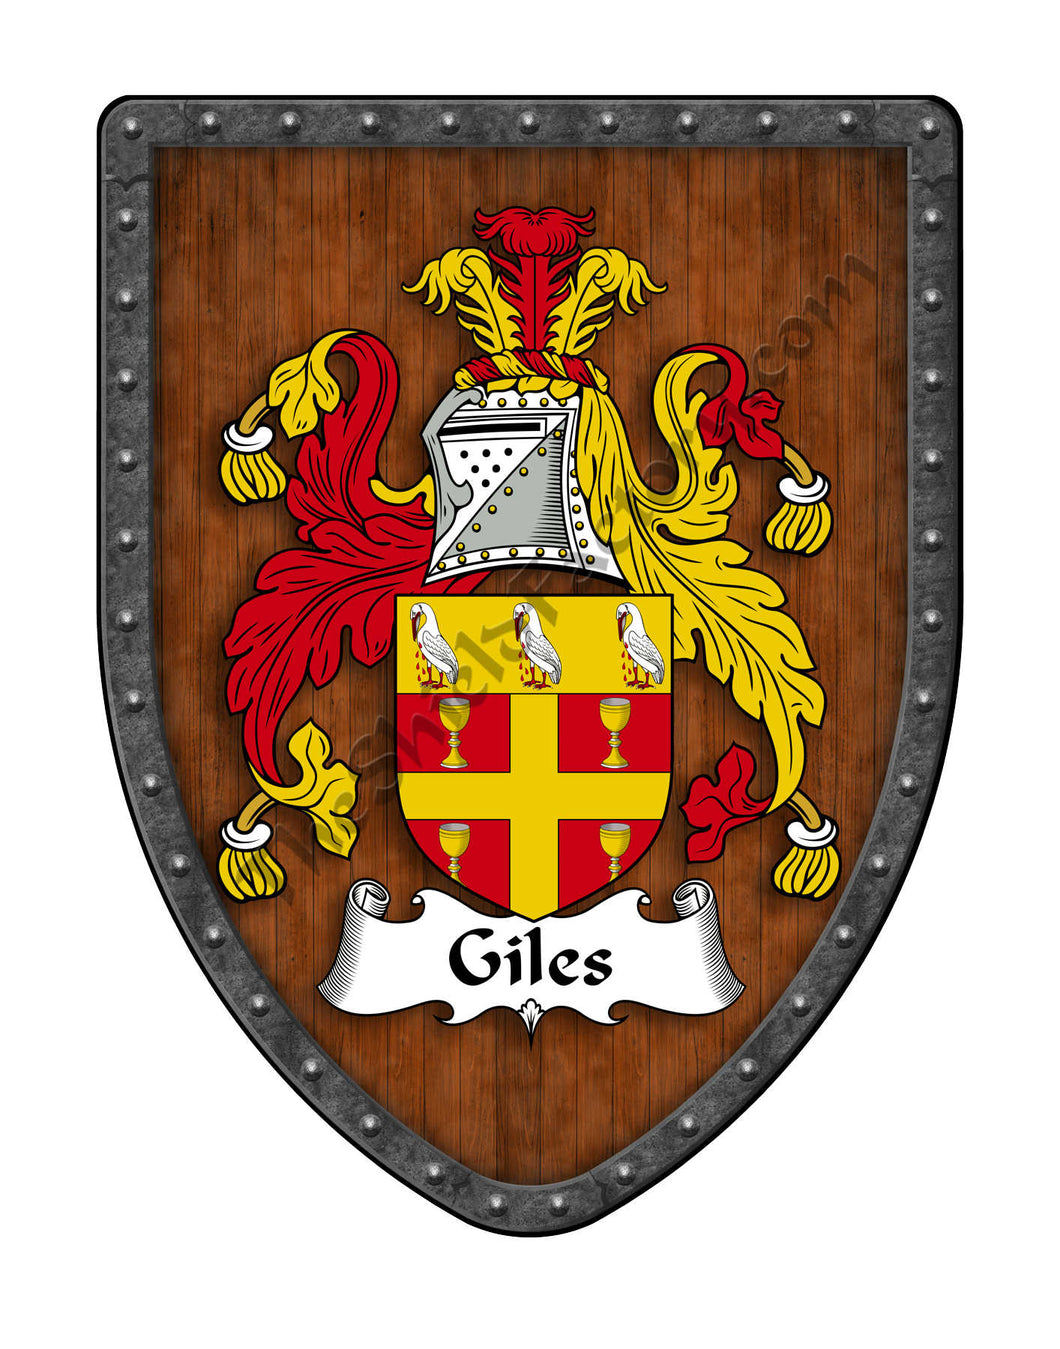 Giles Coat of Arms Shield